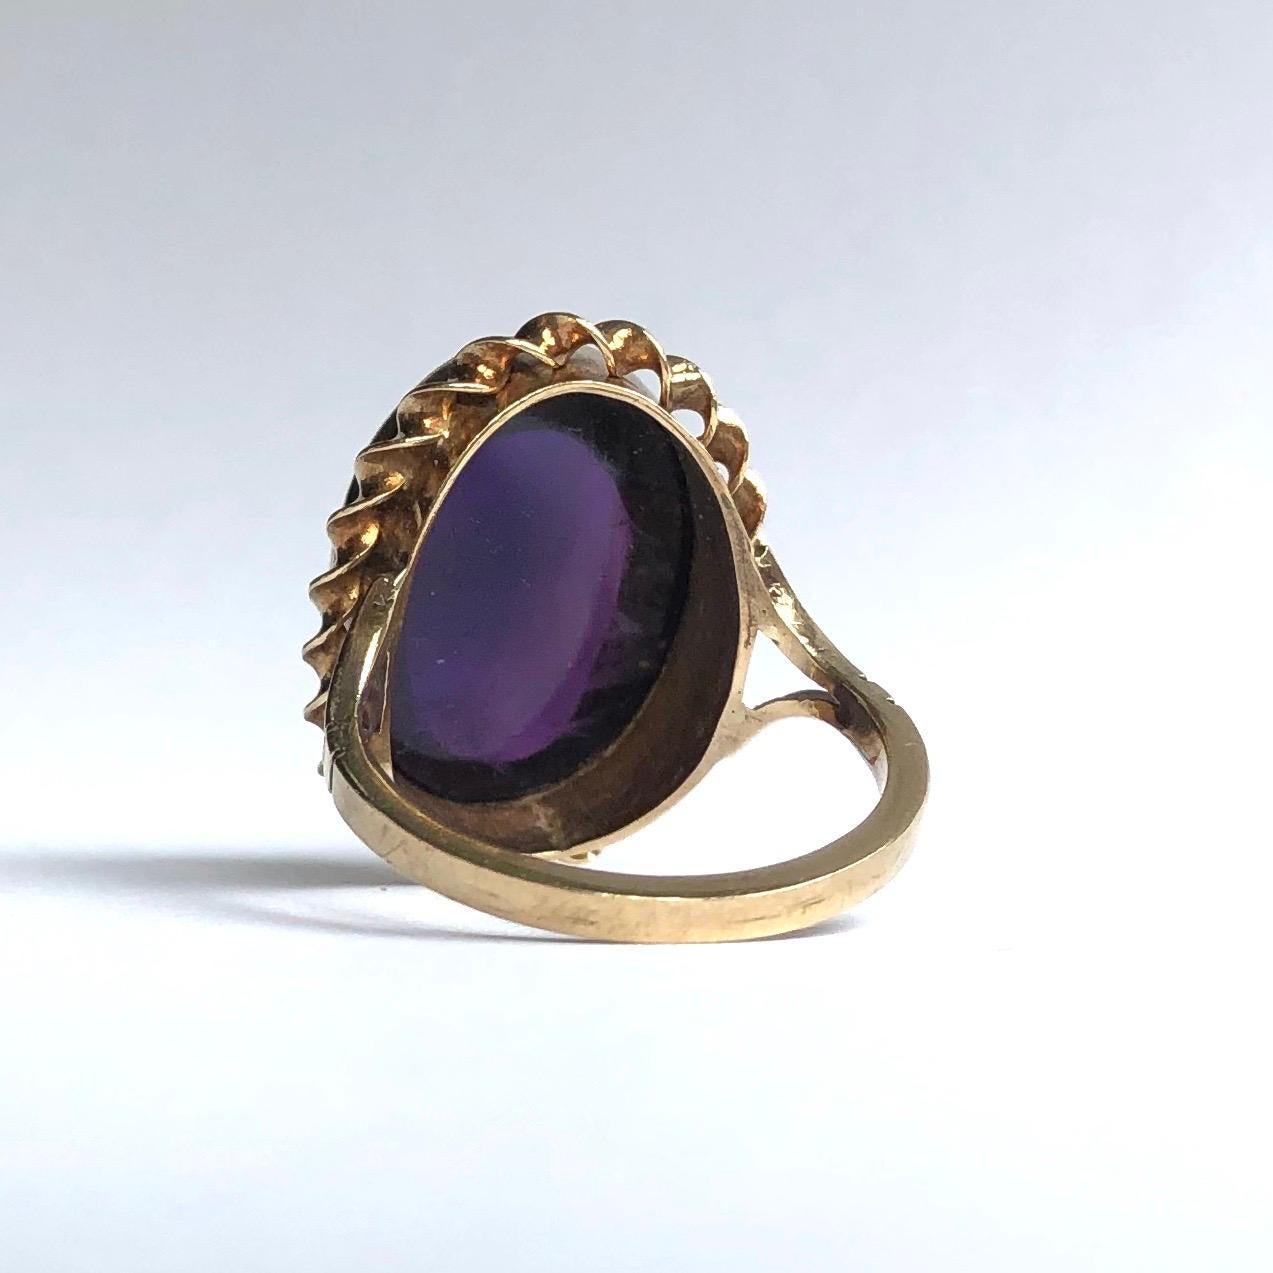 This gorgeous cocktail ring holds a large cabochon amethyst which is glossy and bright purple. Around the stone is a twisted gold frame and this then leads to split shoulders. 

Ring Size: L or 5 3/4 
Stone Dimensions: 21 x 16mm 

Weight: 5.26g